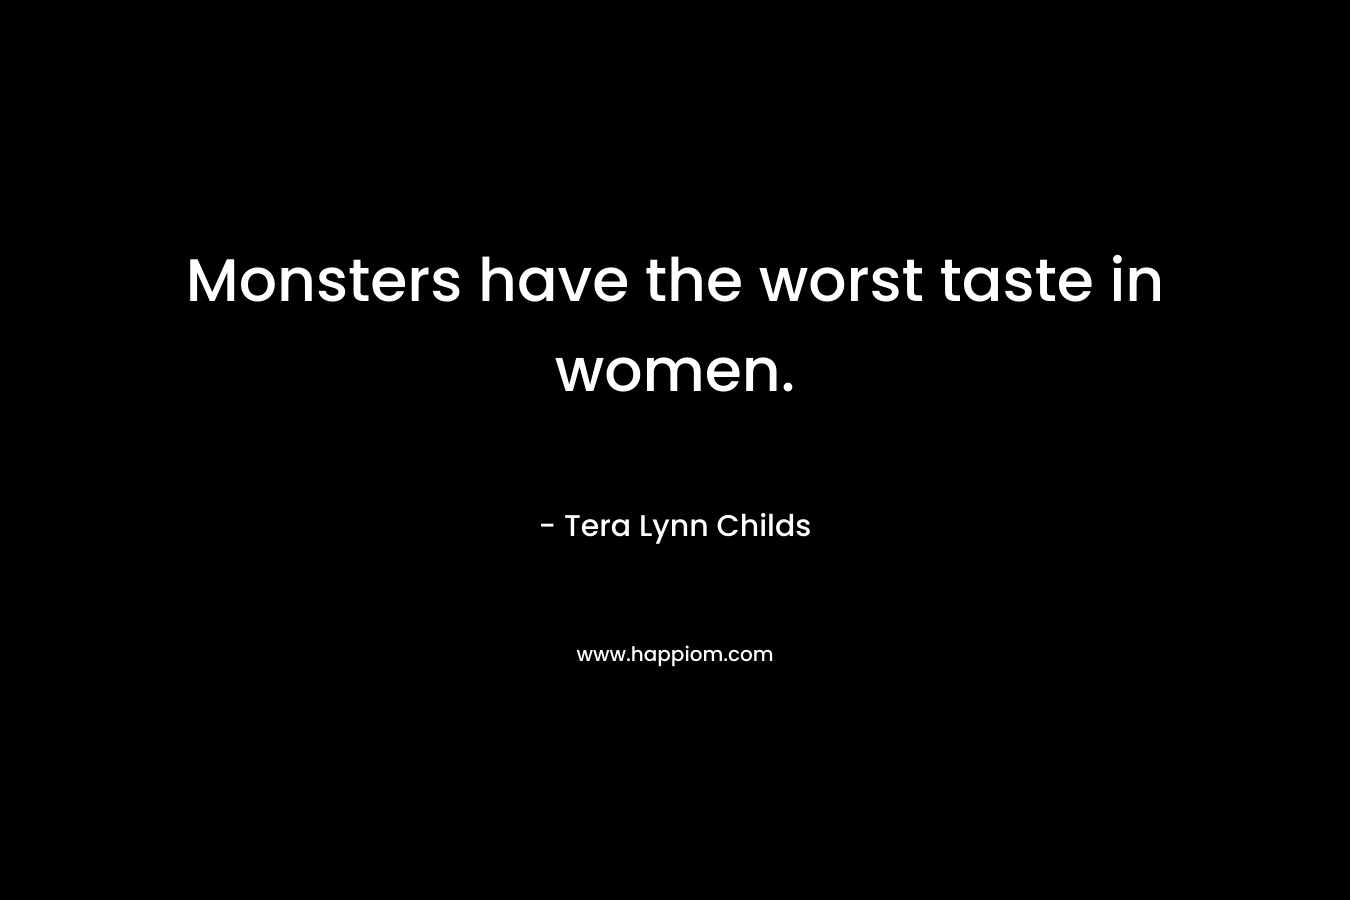 Monsters have the worst taste in women.